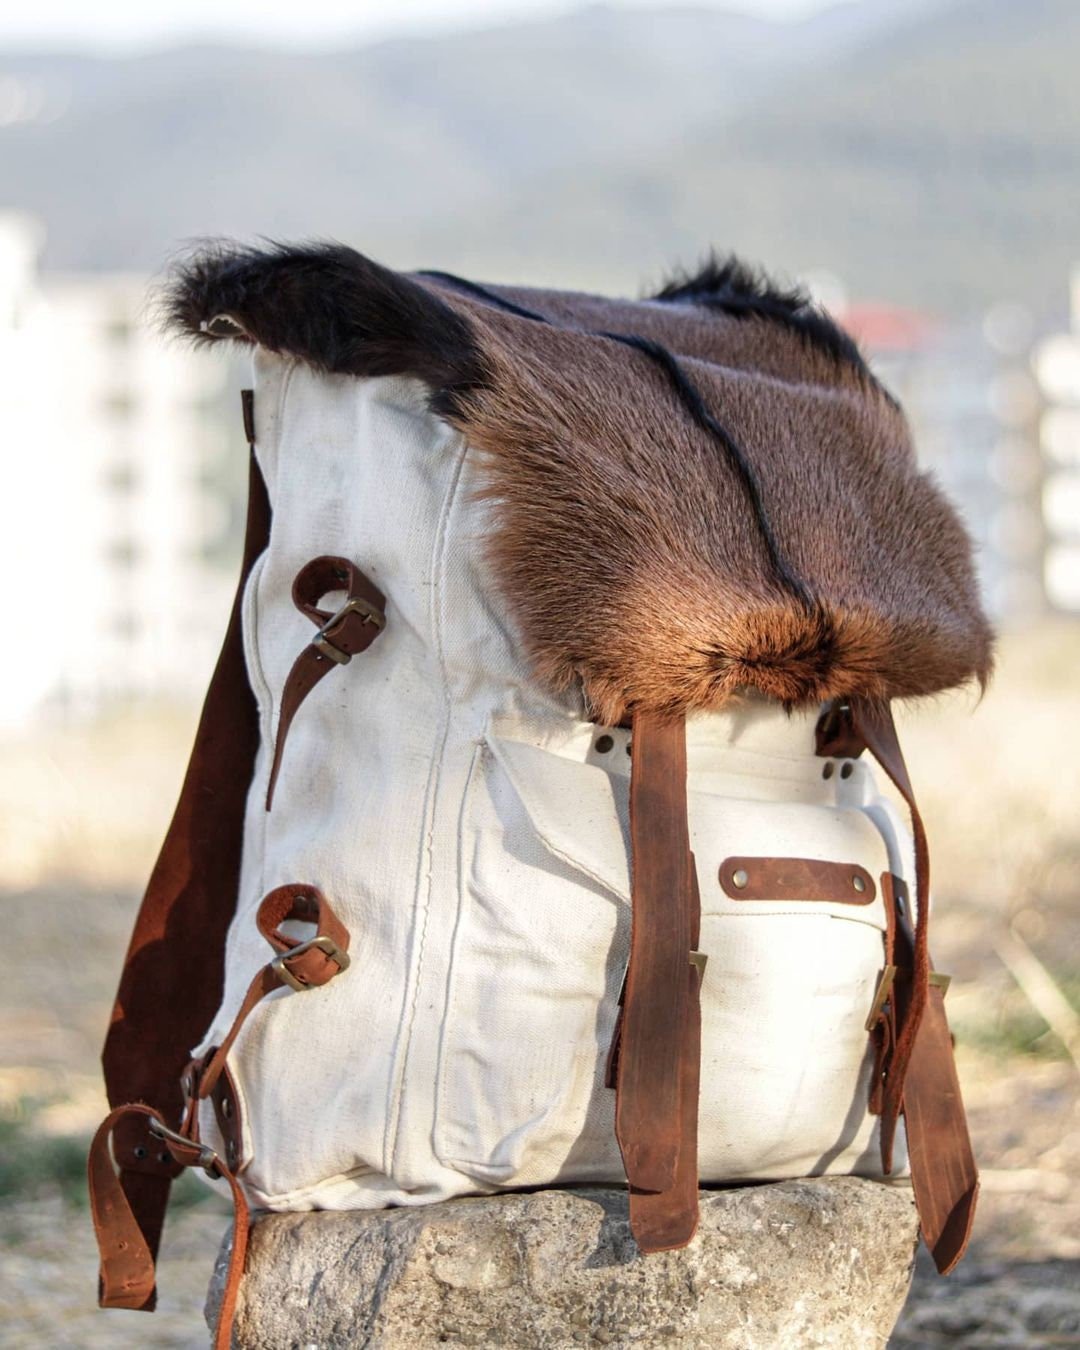 Handmade Genuine White Leather and Waxed Canvas Backpack for Travel, Camping | 20 Litres | Personalization for your request bushcraft - camping - hiking backpack 99percenthandmade   